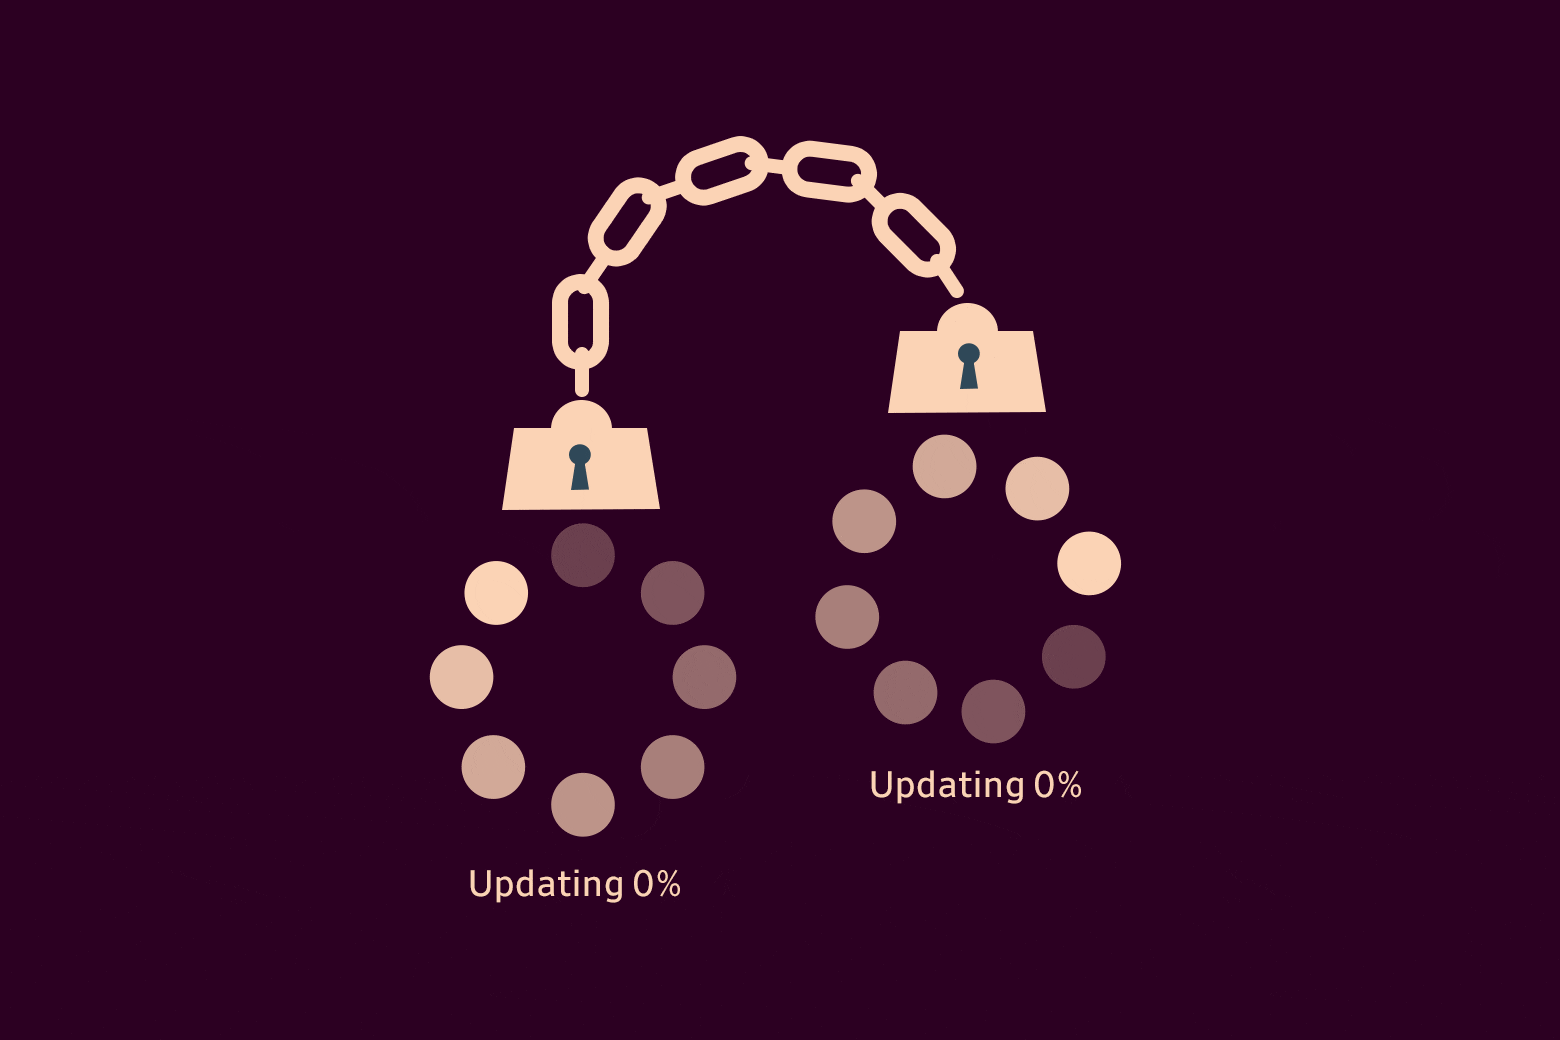 A pair of wrists, with the wrists made up of "updating" circles; underneath each, it says "Updating 0%."